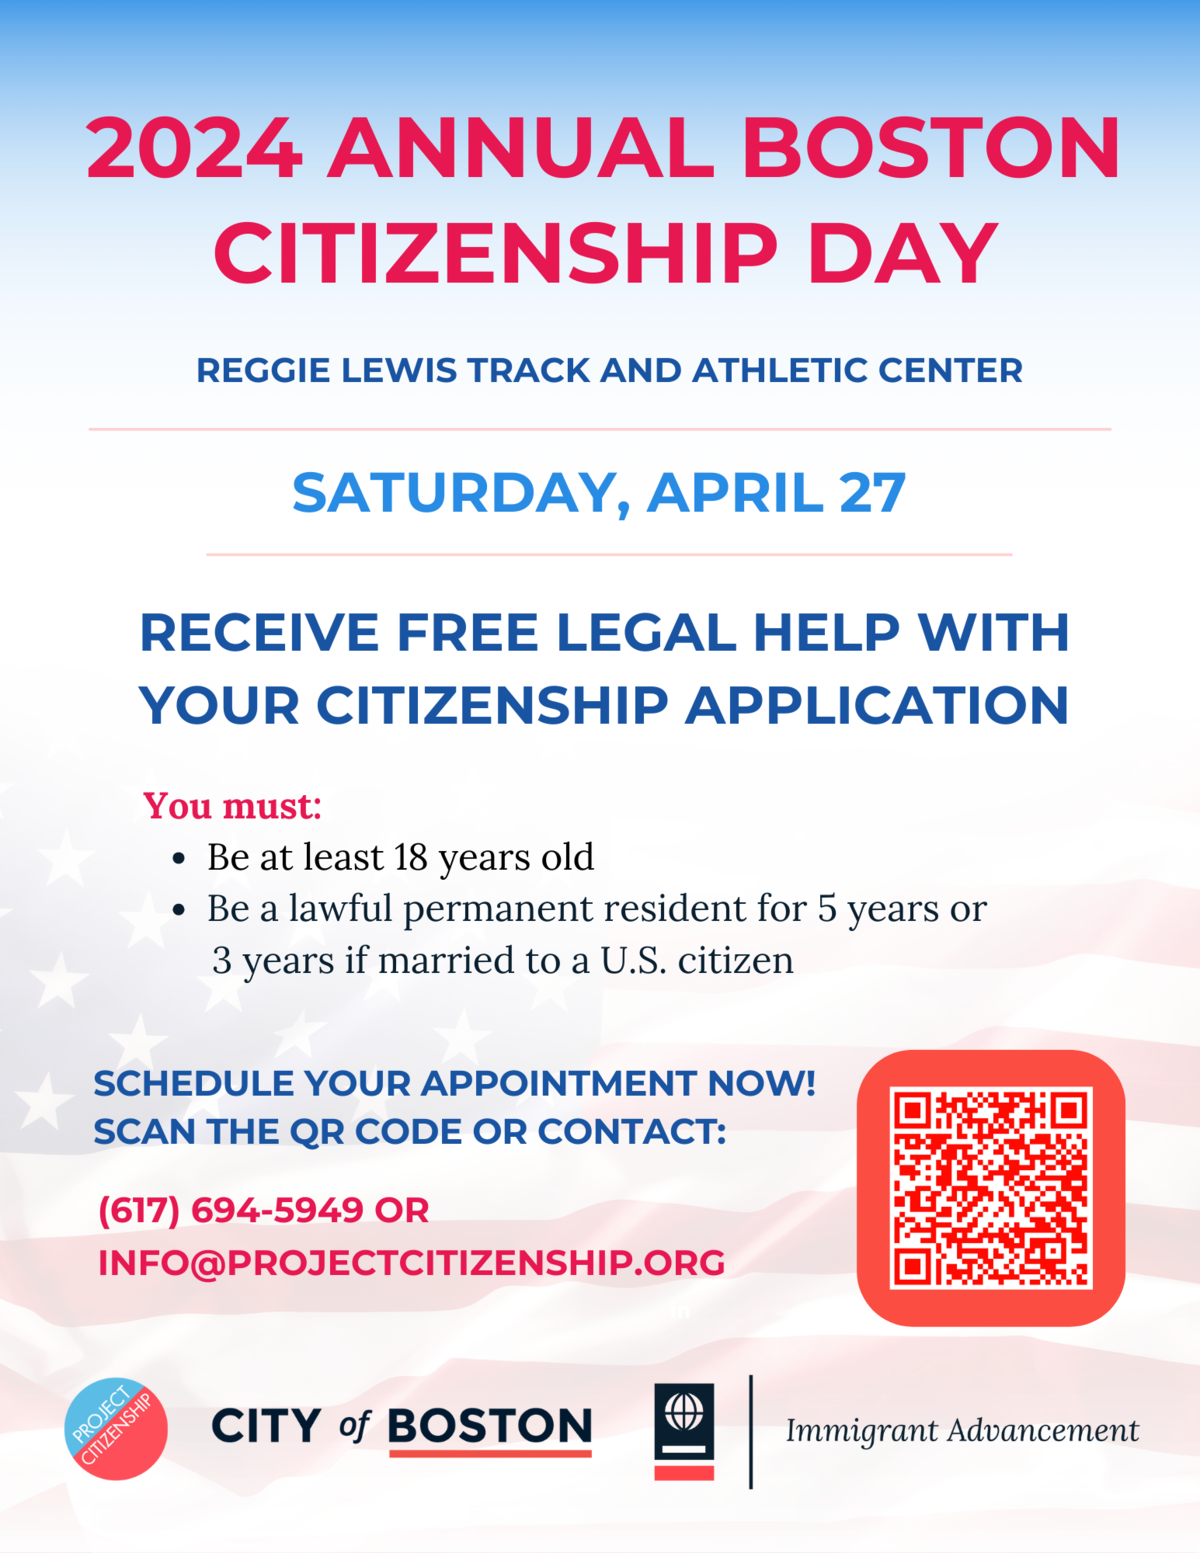 Flyer for Citizenship Day 2024 at the Reggie Lewis Center on April 27, 2024.